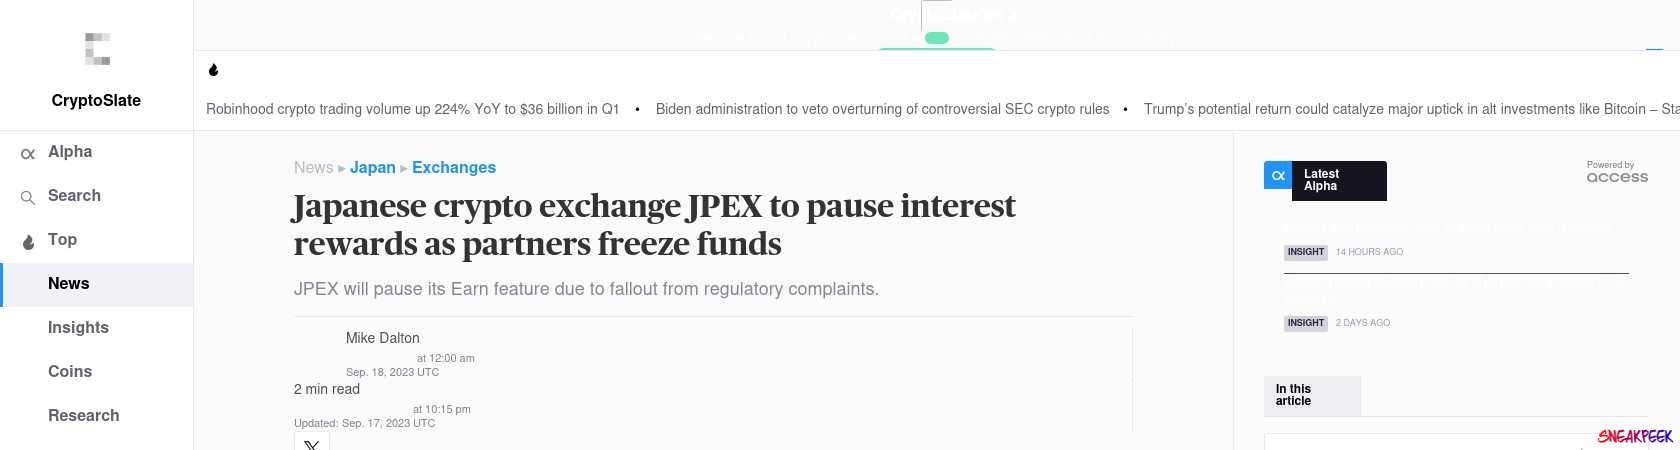 Read the full Article:  ⭲ Japanese crypto exchange JPEX to pause interest rewards as partners freeze funds